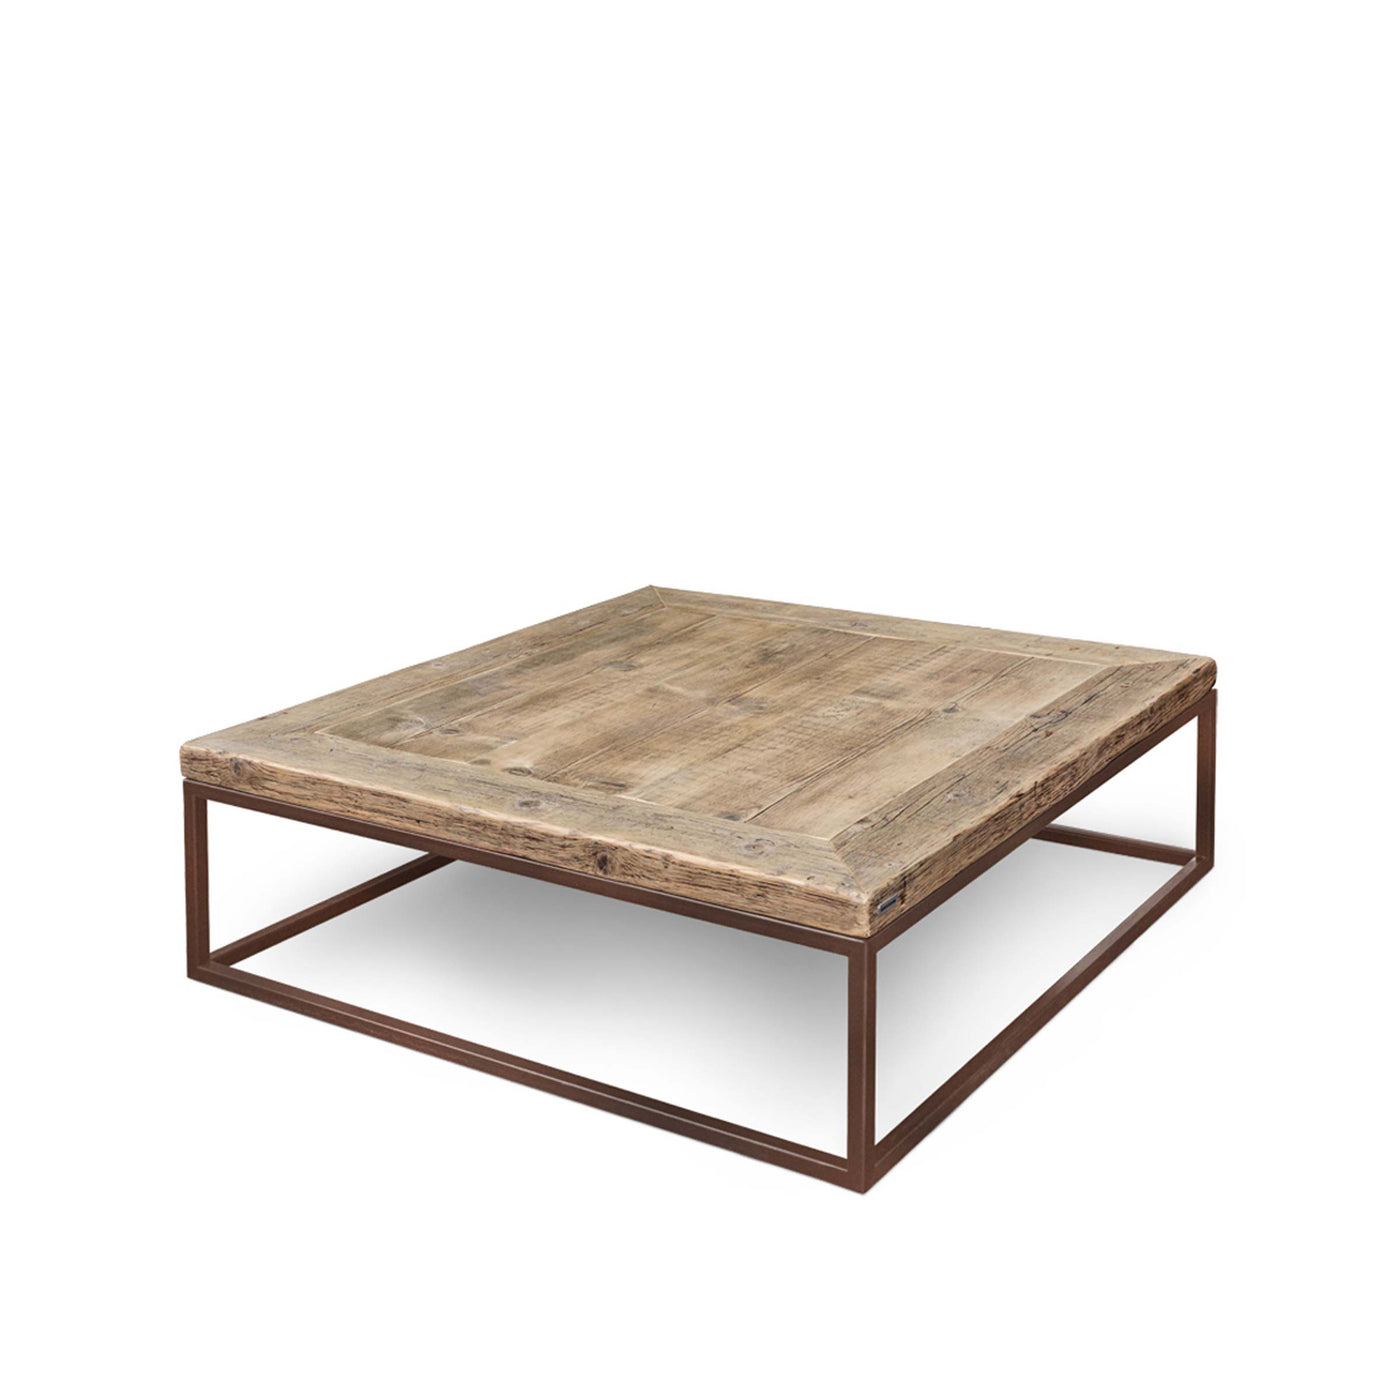 Wood Coffee Table ROMEO by Giuseppe Mazzardi for Inventoom 05